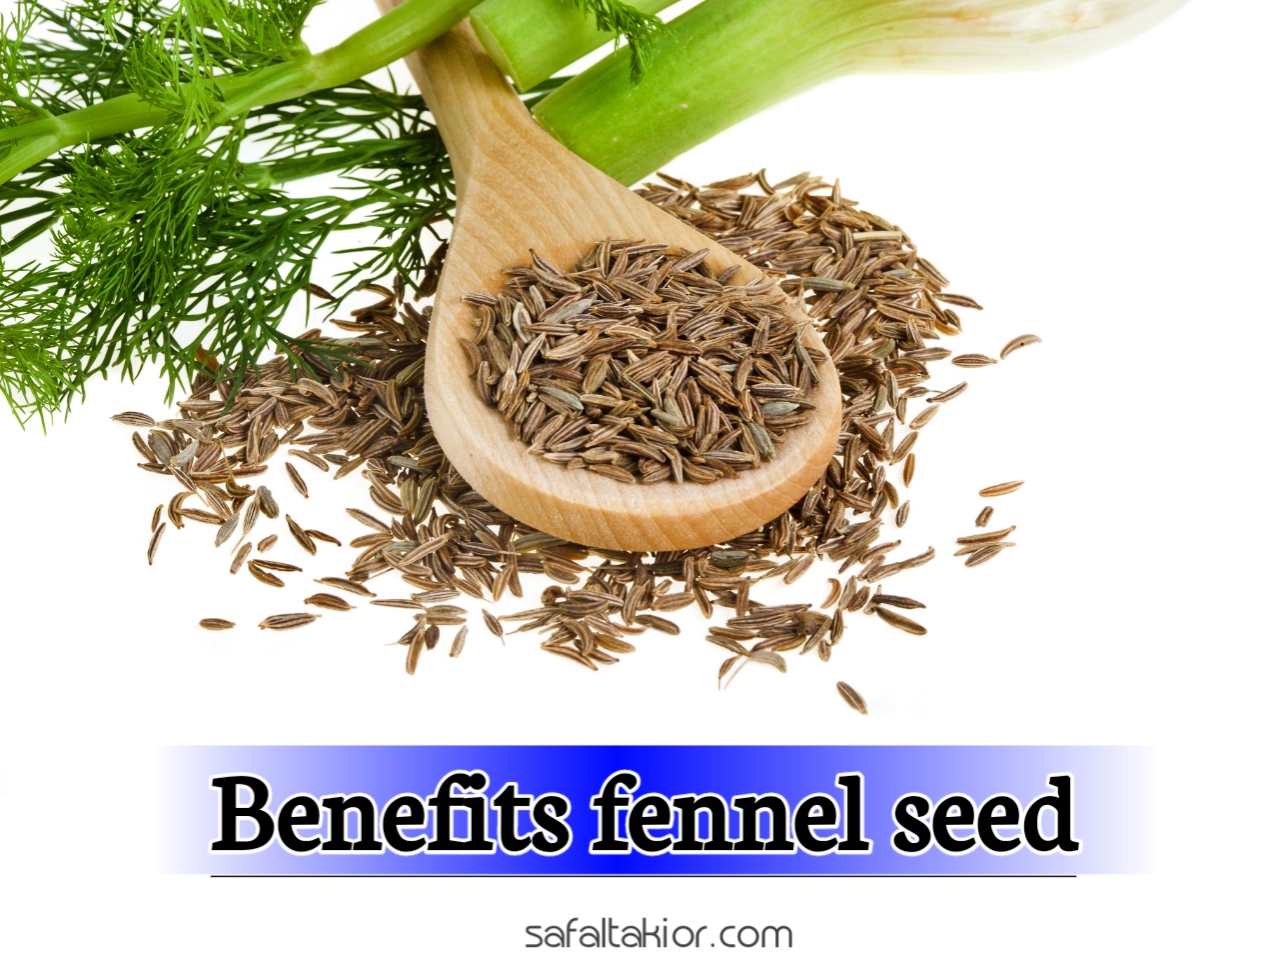 The 17 Benefits of Fennel Seed for Your Health